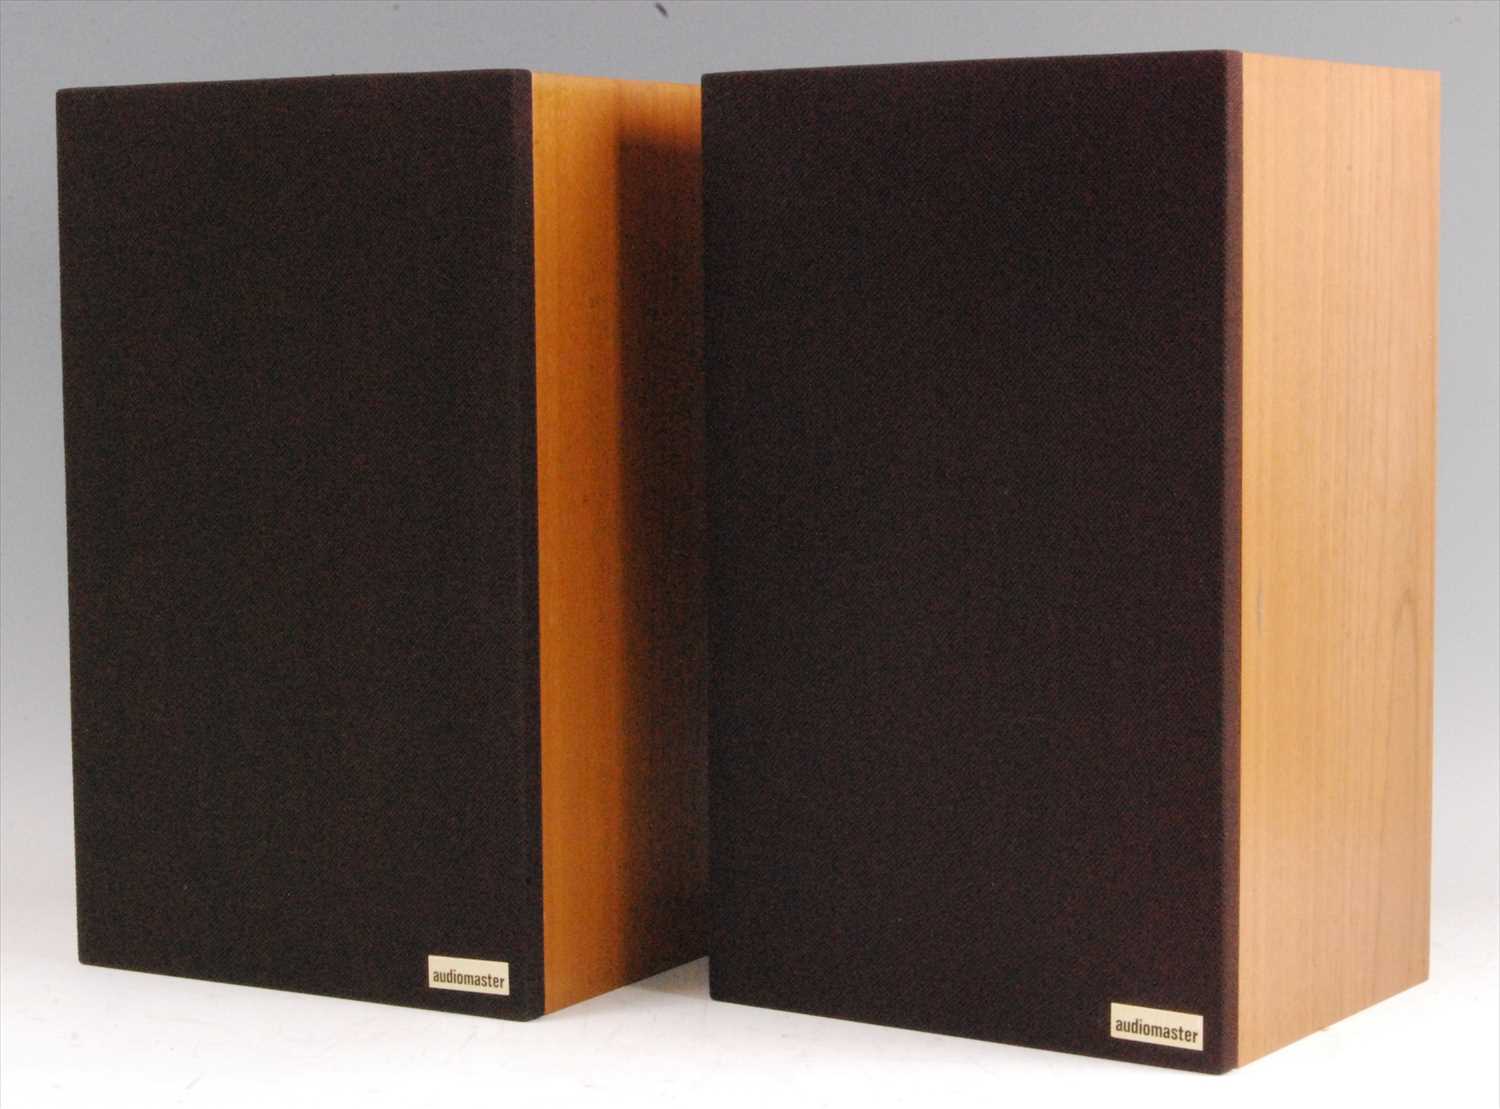 Lot 514 - A pair of Audiomaster MLS 1 stereo speakers